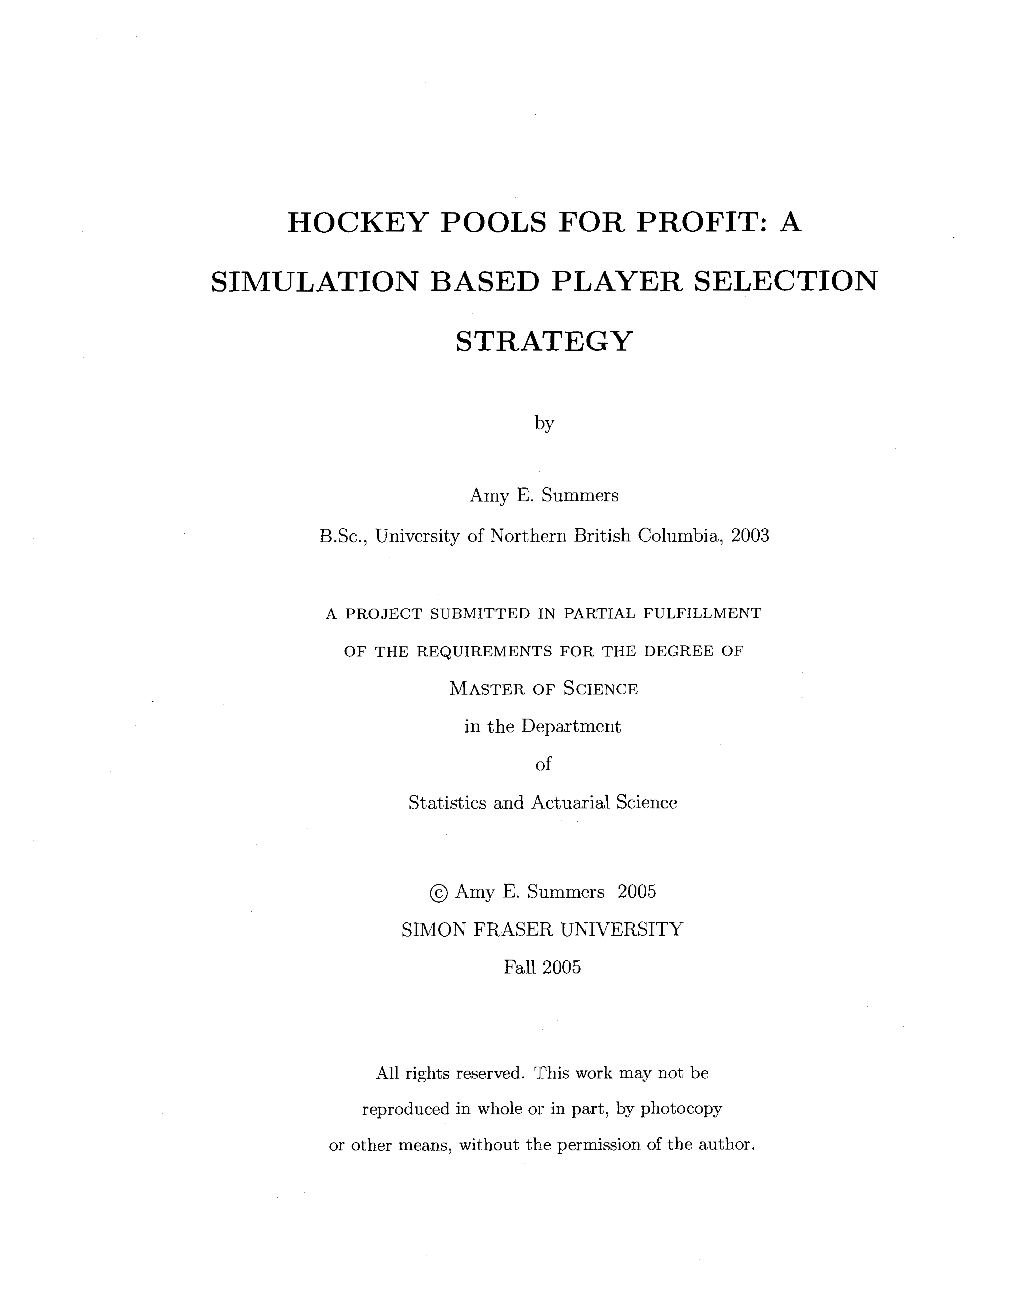 Hockey Pools for Profit: a Simulation Based Player Selection Strategy